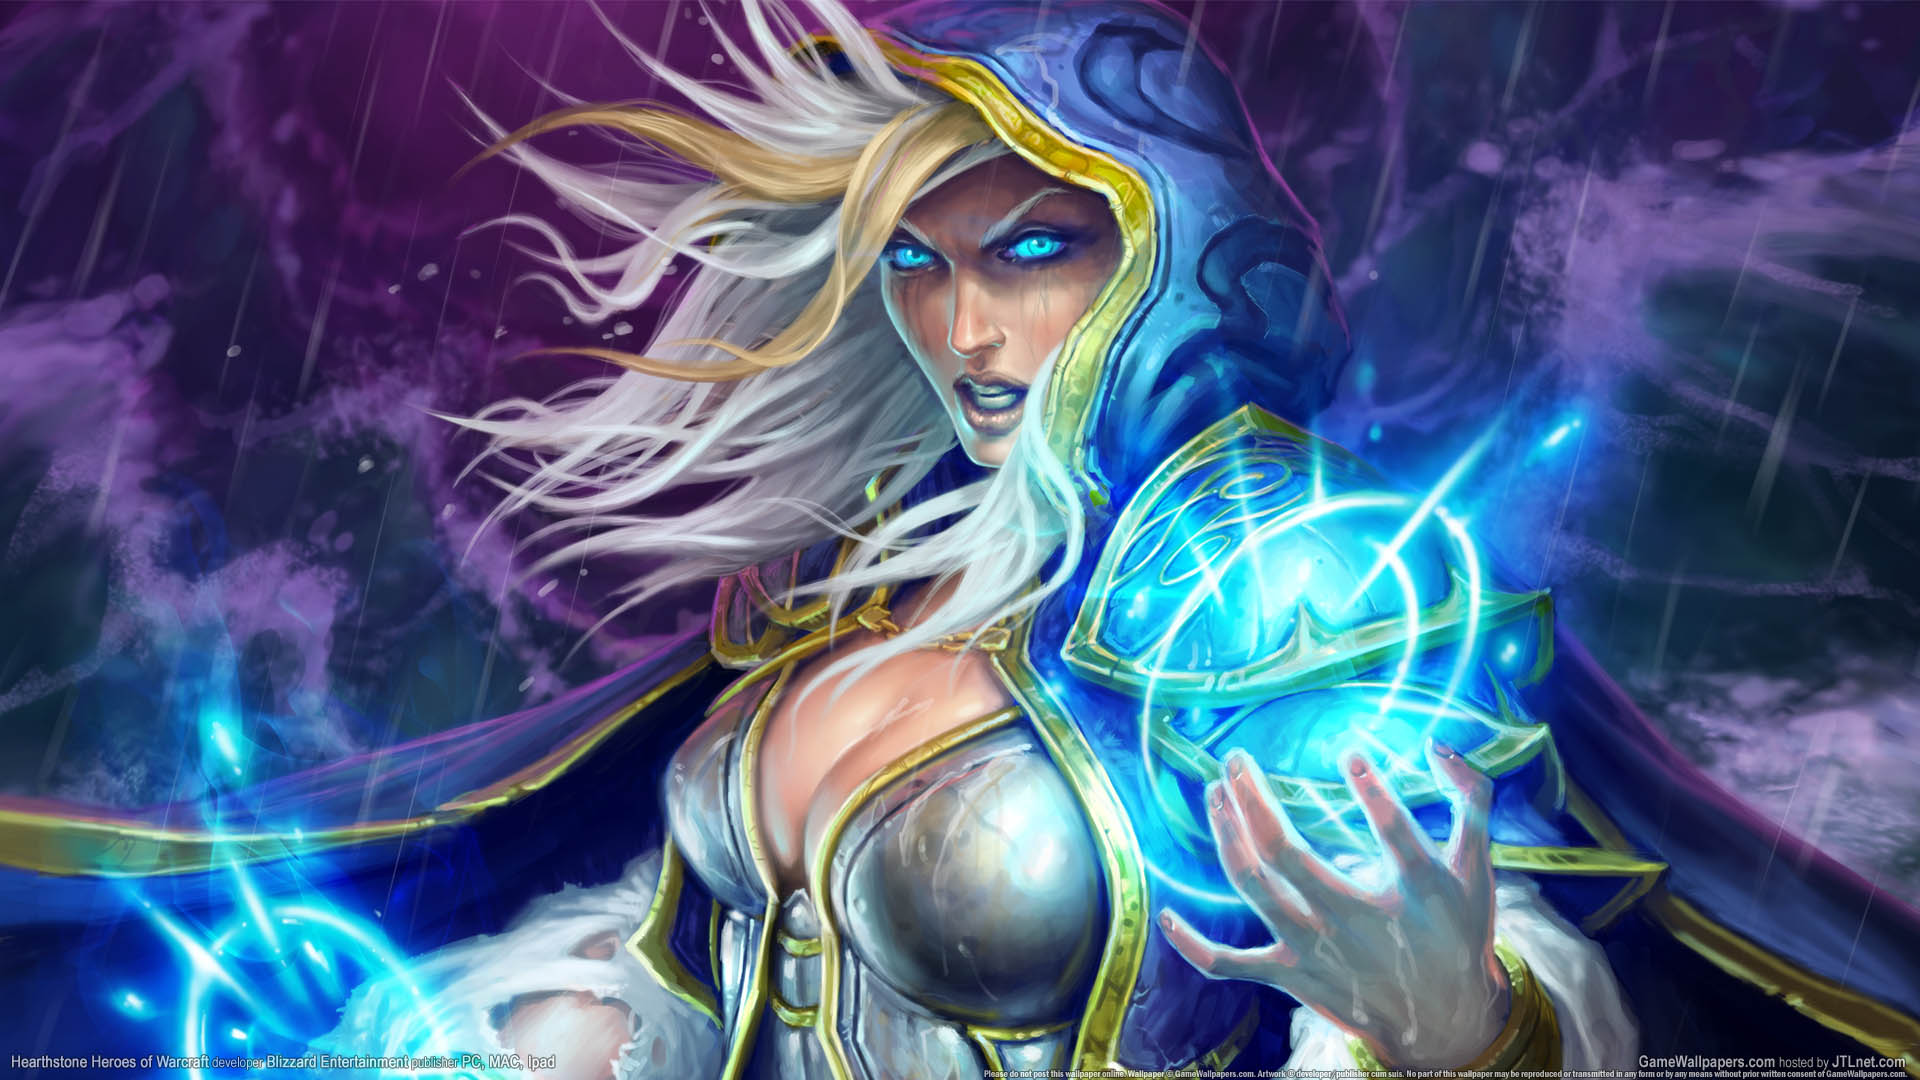 Hearthstone: Heroes of Warcraft achtergrond 03 1920x1080